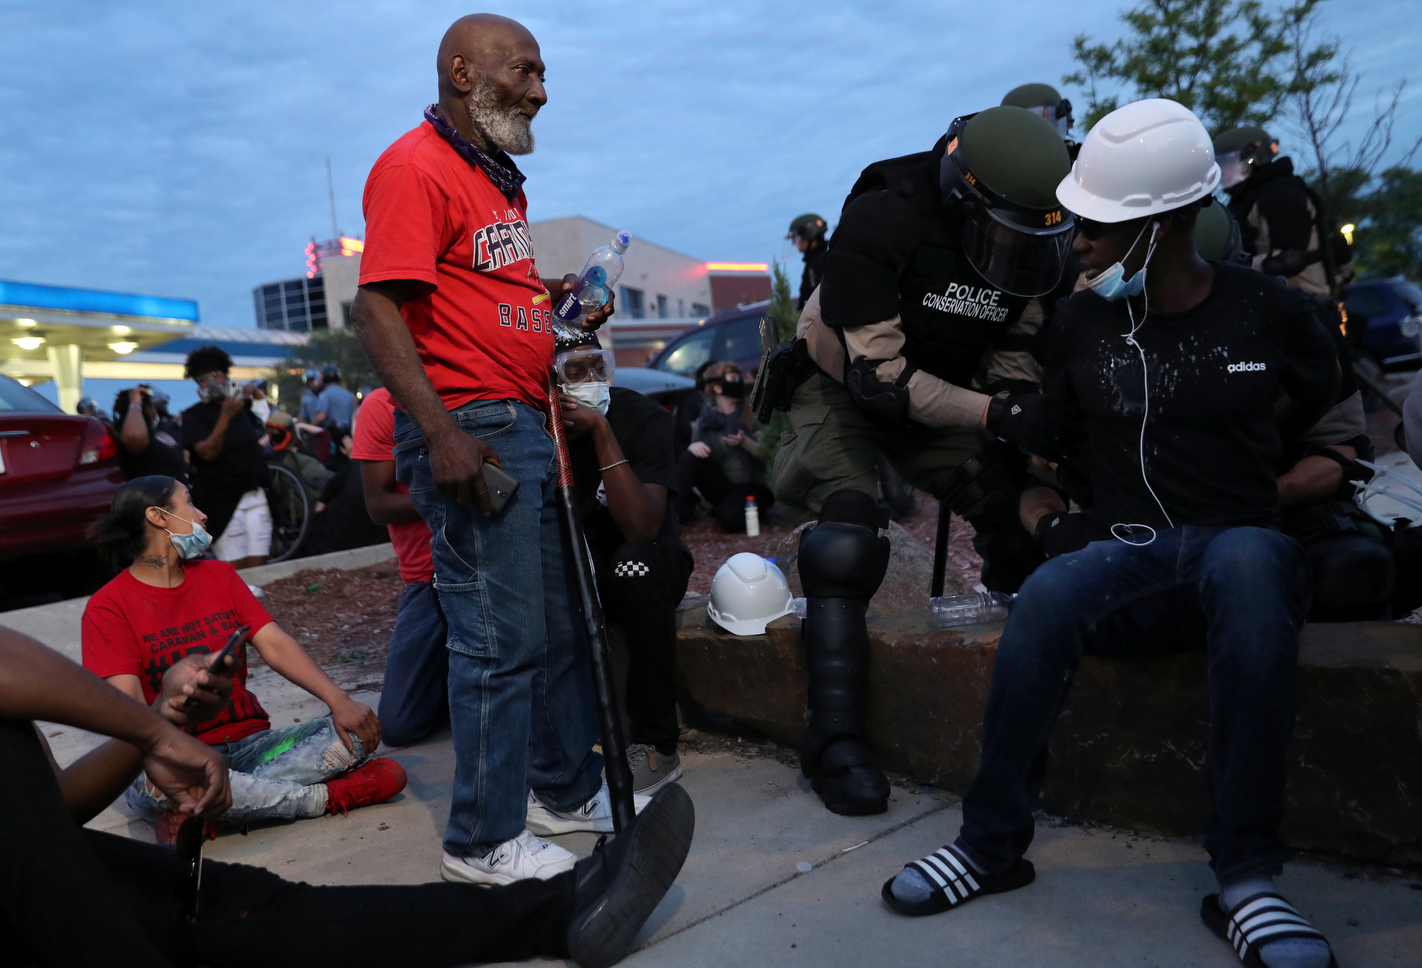 A protester is detained during a rally against the death in Minneapolis police custody of George Floyd, in Minneapolis, Minnesota, U.S. May 31, 2020. REUTERS/Leah Millis